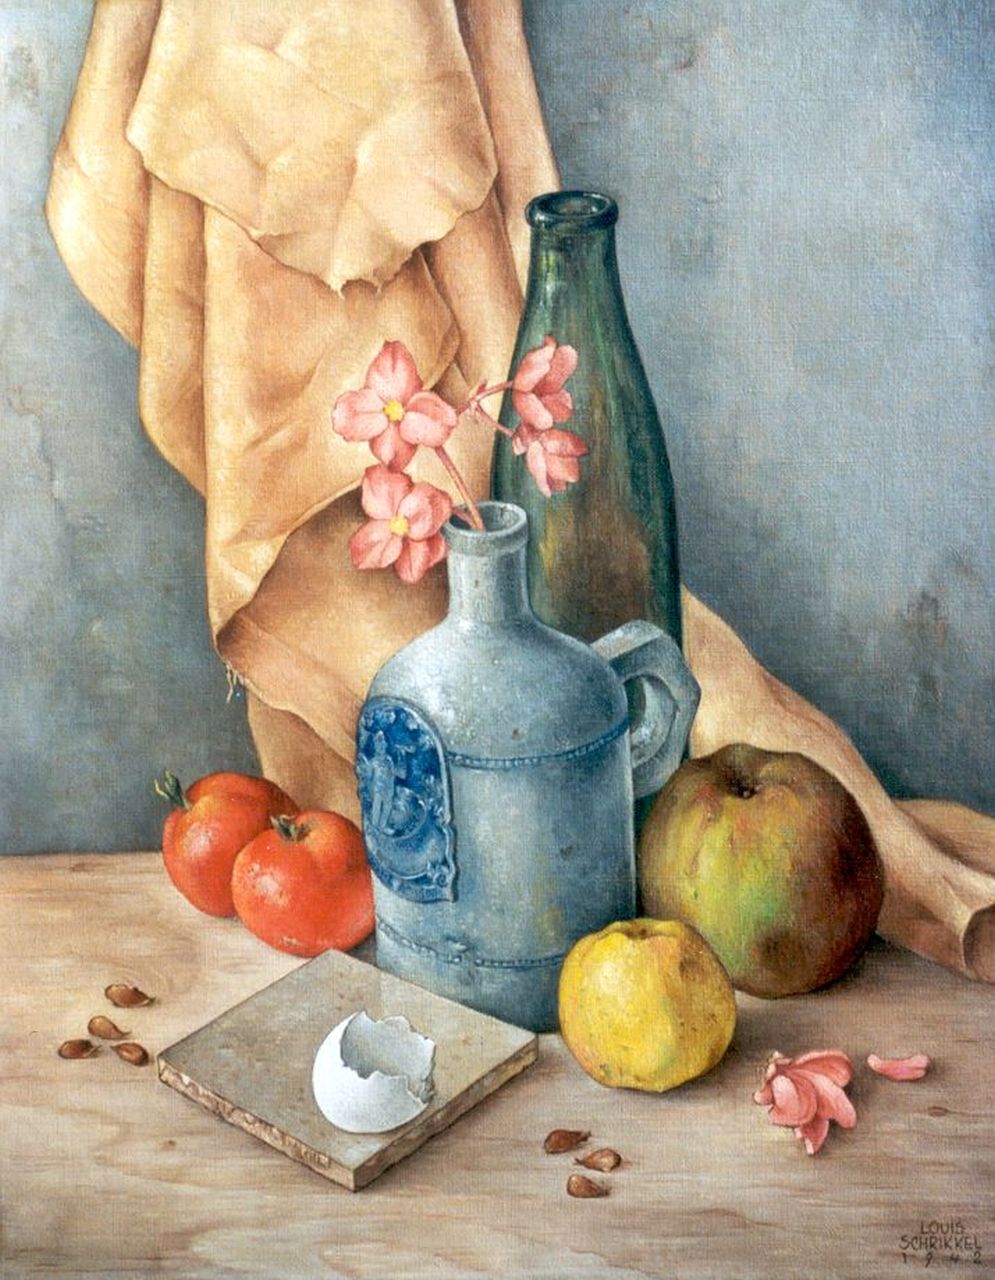 Schrikkel J.L.  | Johannes Lodewijk 'Louis' Schrikkel, A still life with a jug and apples, Öl auf Leinwand 50,0 x 40,2 cm, signed l.r. and on the reverse und dated 1942